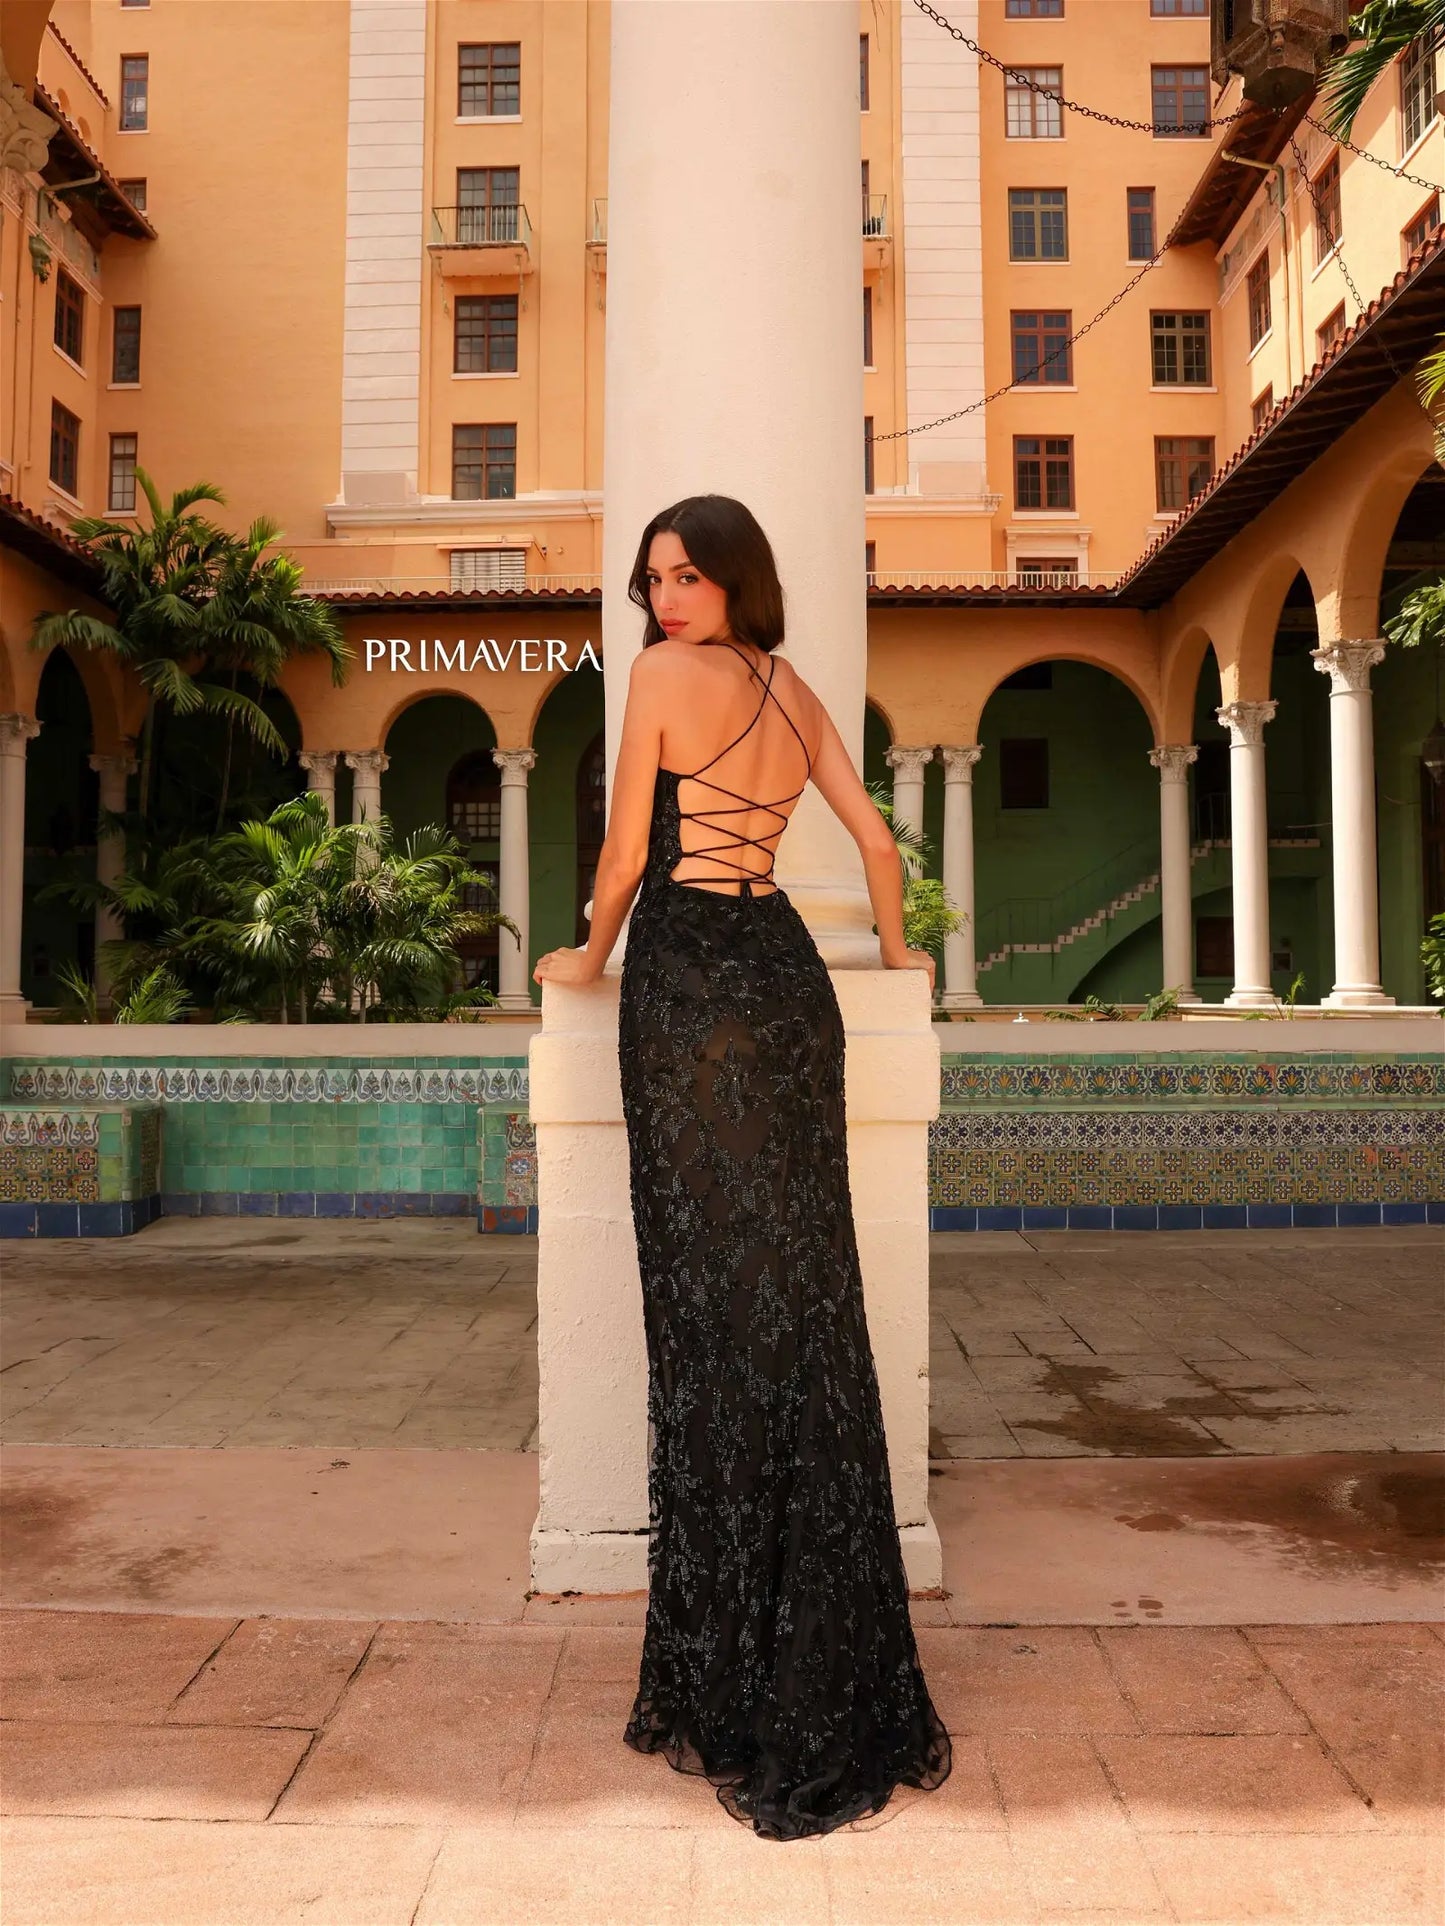 Step into the spotlight in the Primavera Couture 4161 Prom Dress. With dazzling sequin details and a figure-flattering fit, this dress is sure to turn heads. The high slit adds a touch of drama, while the lace-up back adds an extra element of style. Perfect for any formal event.